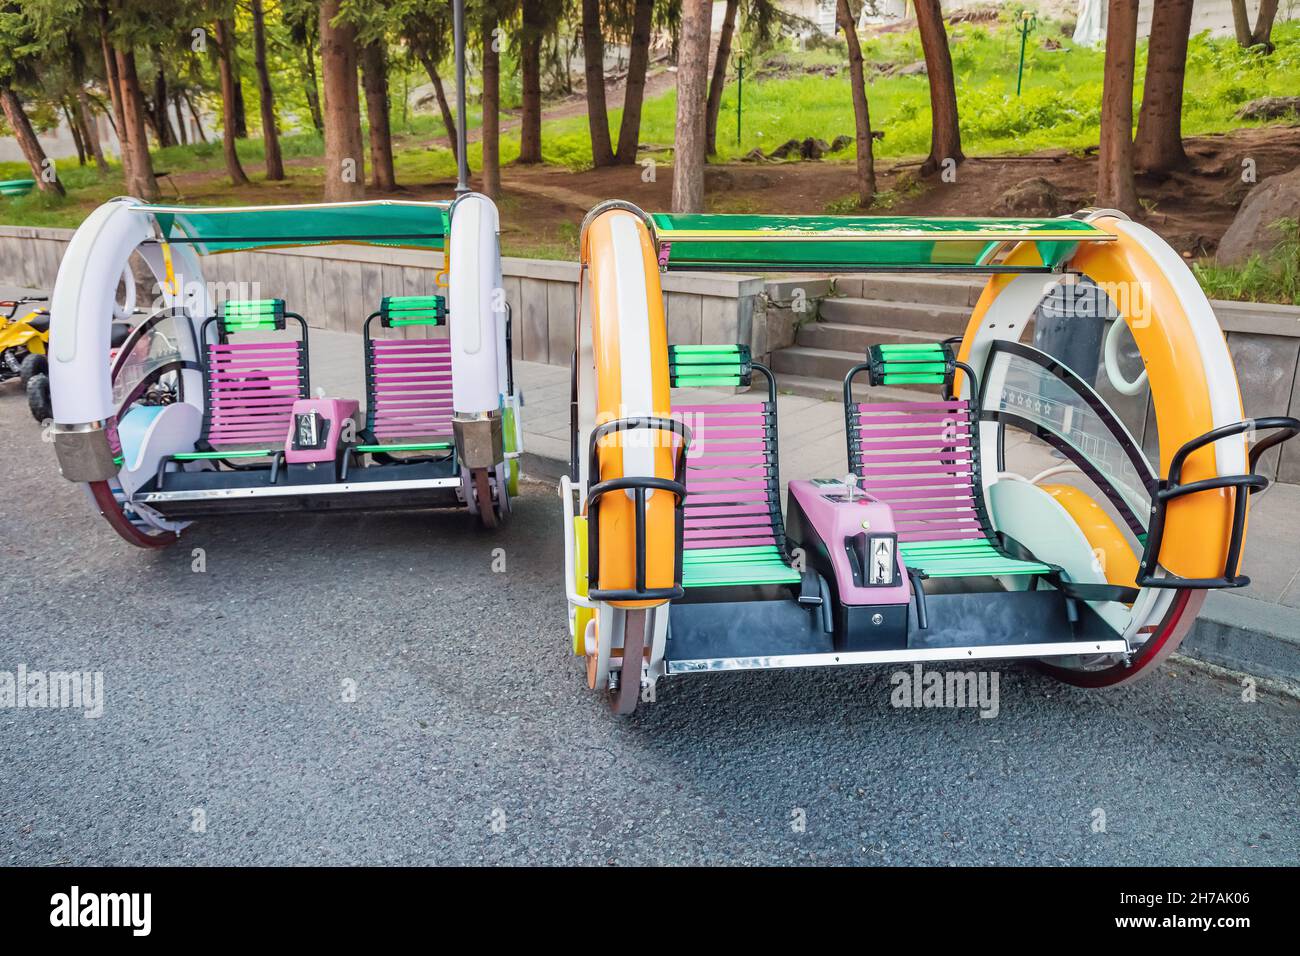 a bench on wheels based on a hoverboard or a gyro scooter for fun trips around the park with your family Stock Photo